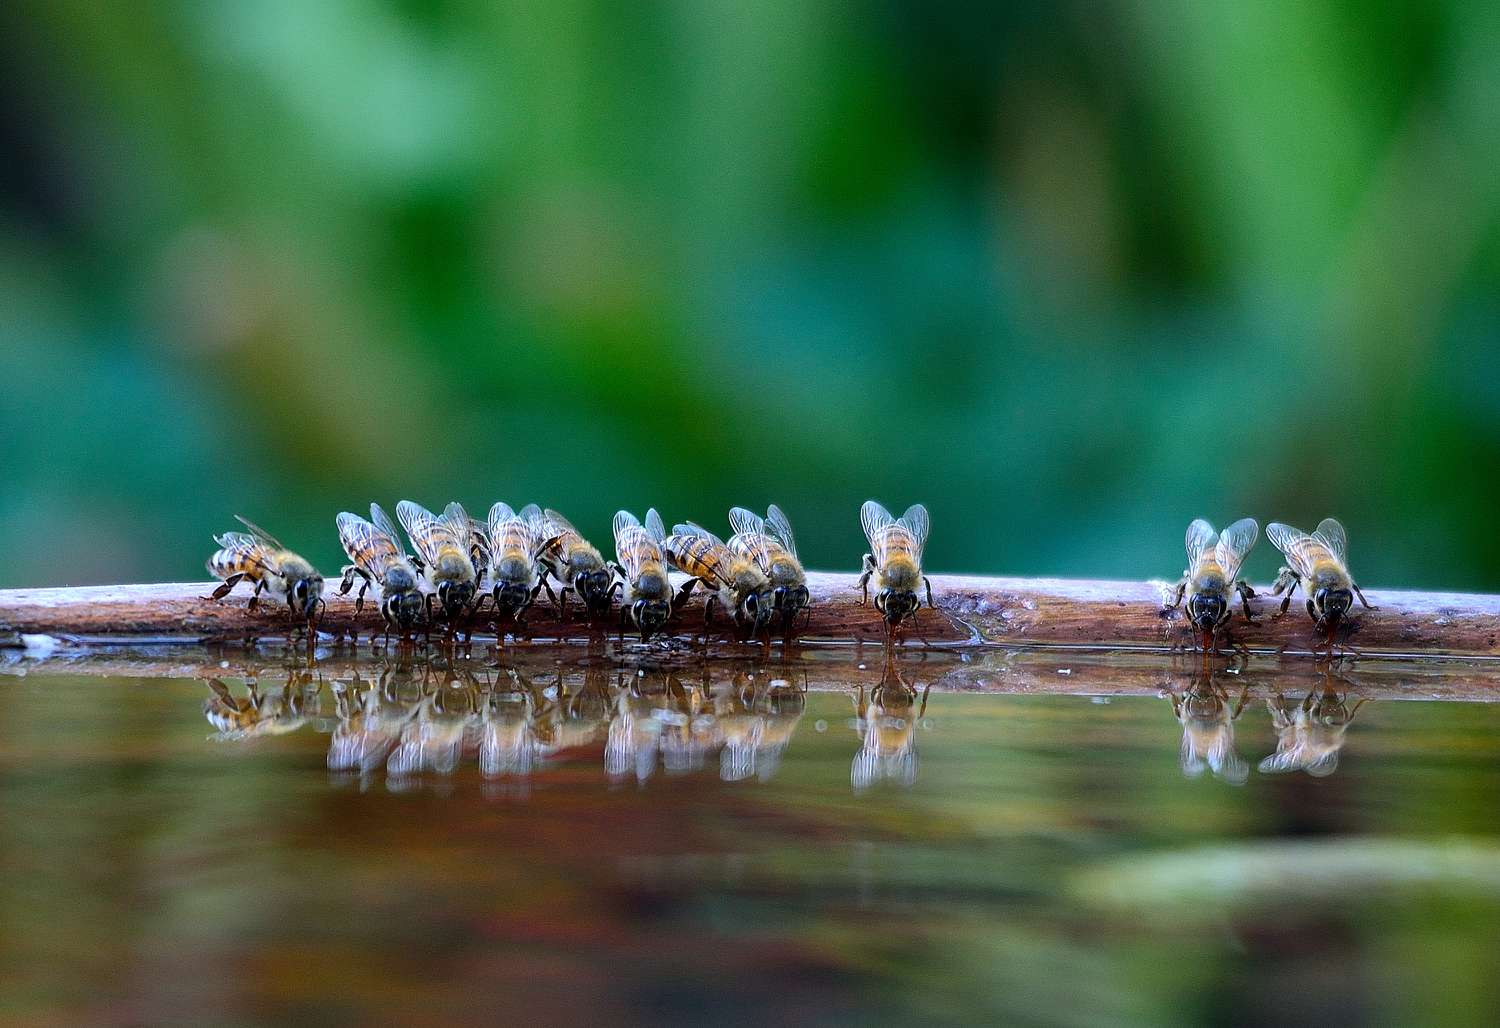 bees drinking from shallow water area